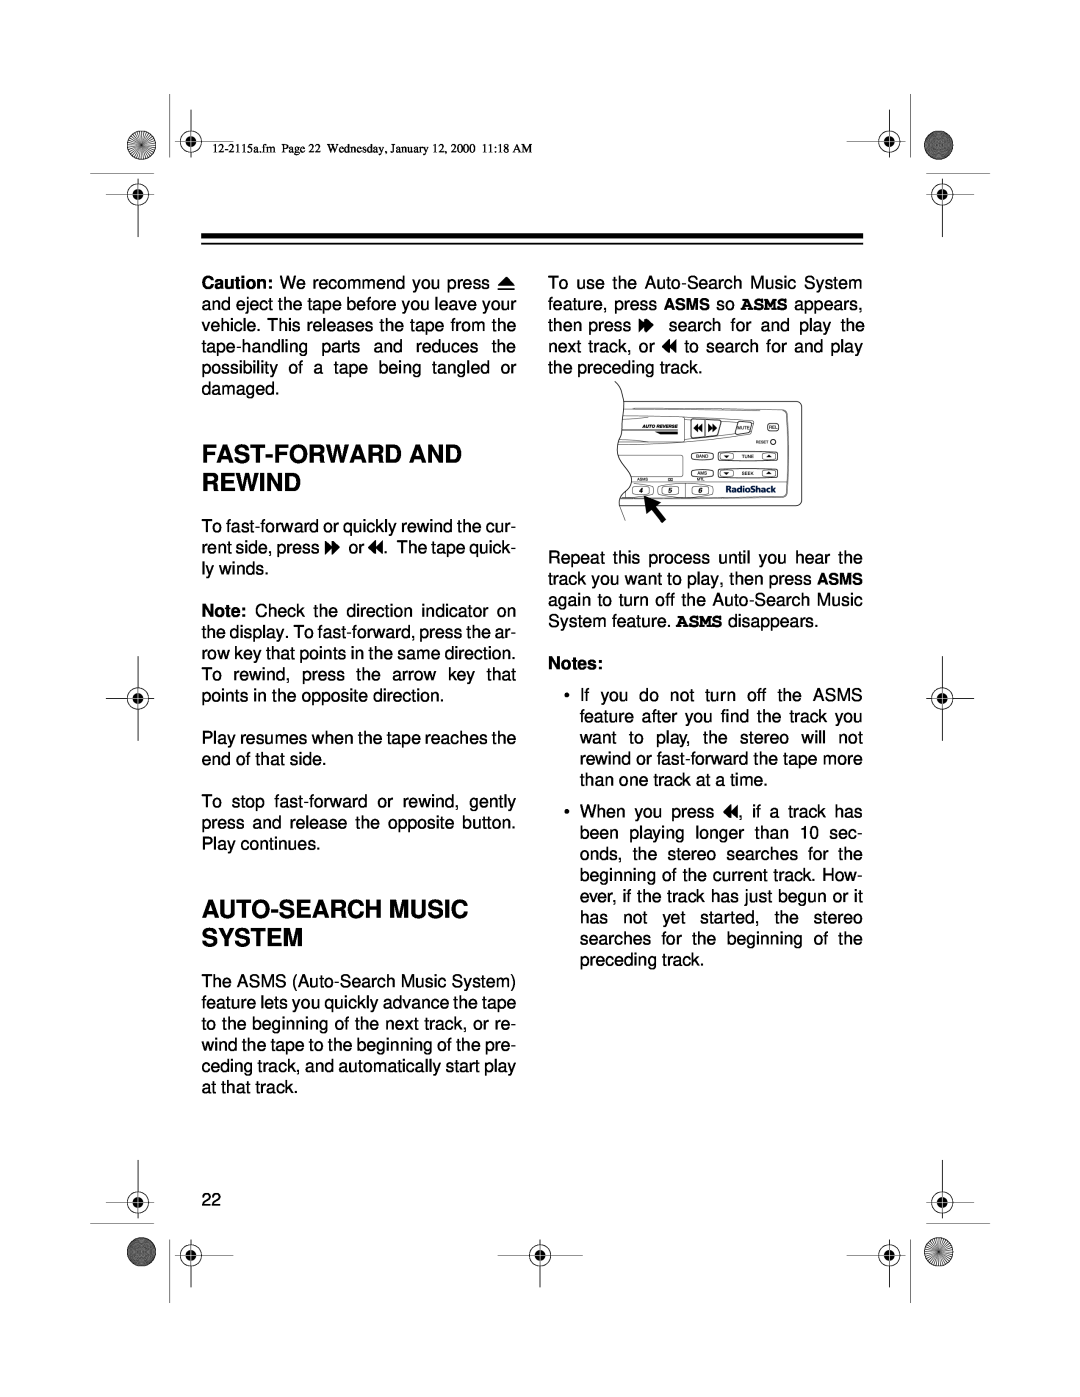 Radio Shack AM/FM Stereo Cassette owner manual Fast-Forwardand Rewind, Auto-Searchmusic System 